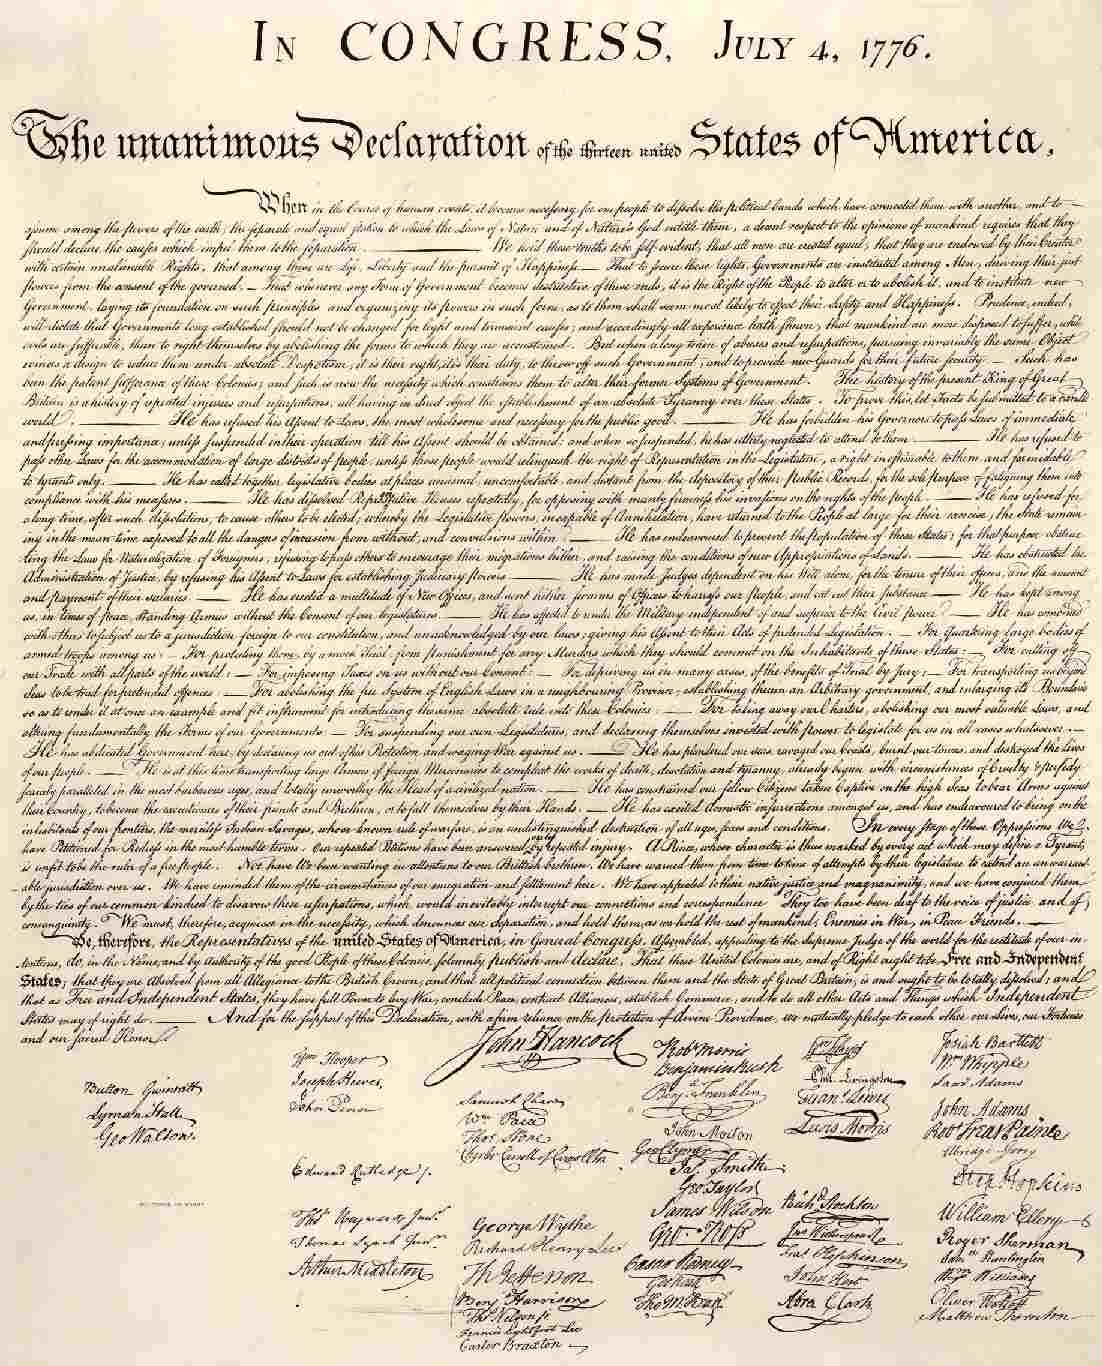 Declaration of Independence of United States of America July 4, 1776